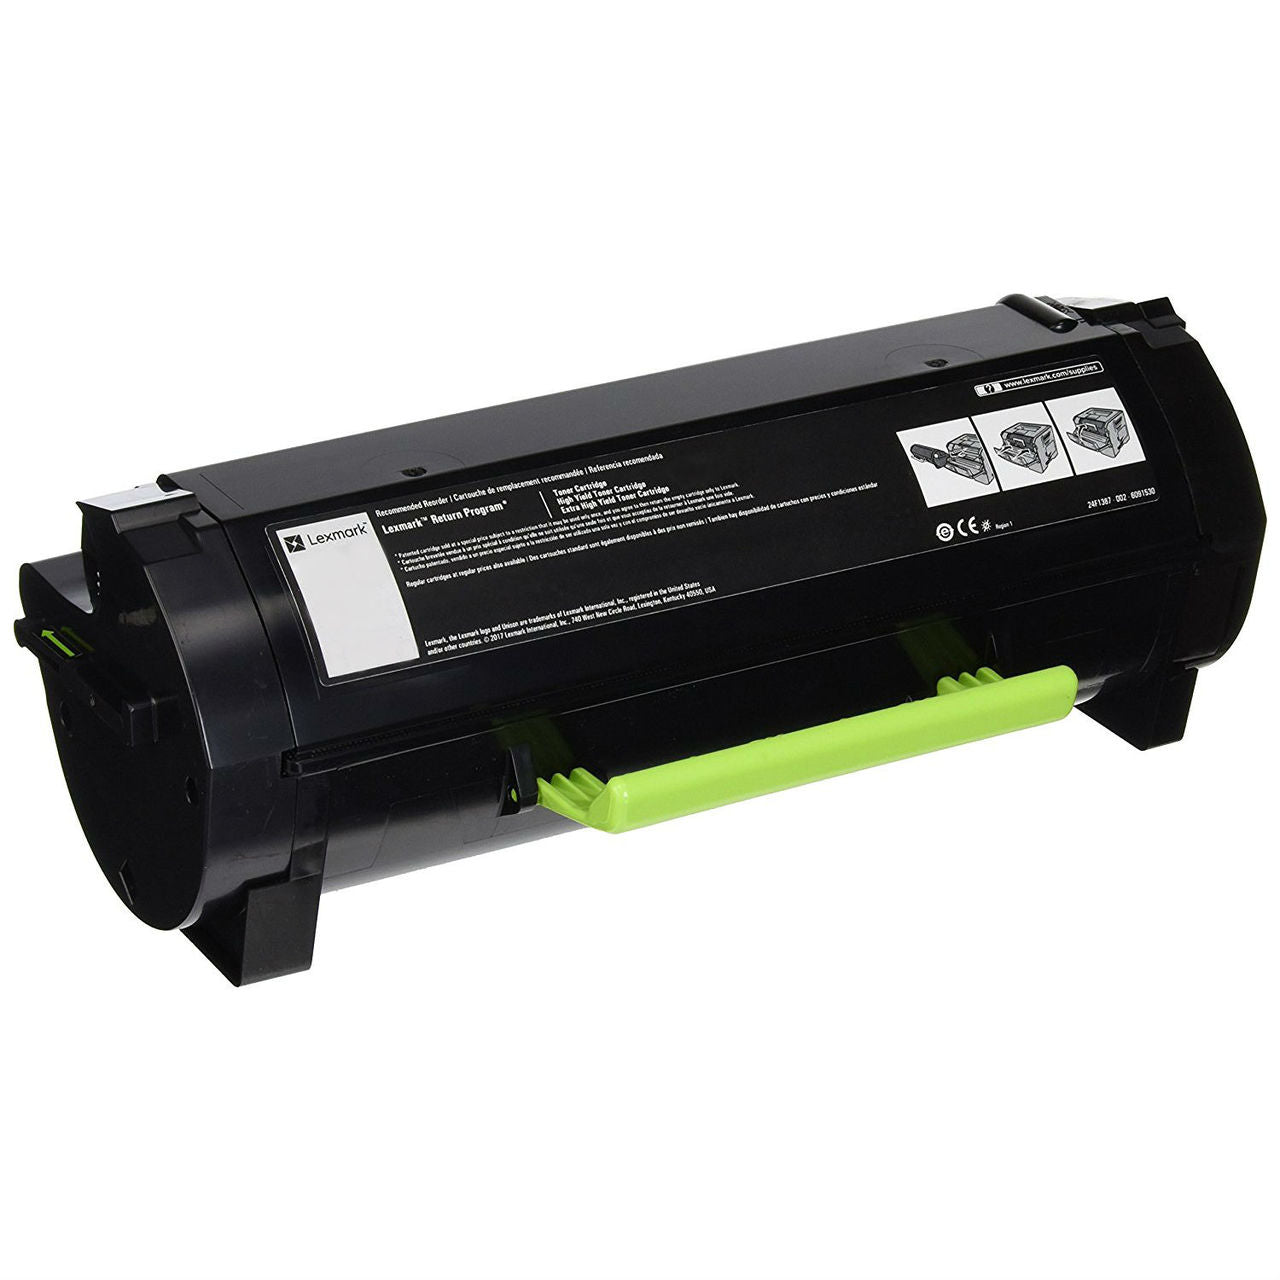 OEM Lexmark 51B0XA0 Extra High Yield Toner Cartridge for MS517, MS617, MX517, MX617 [20,000 Pages]